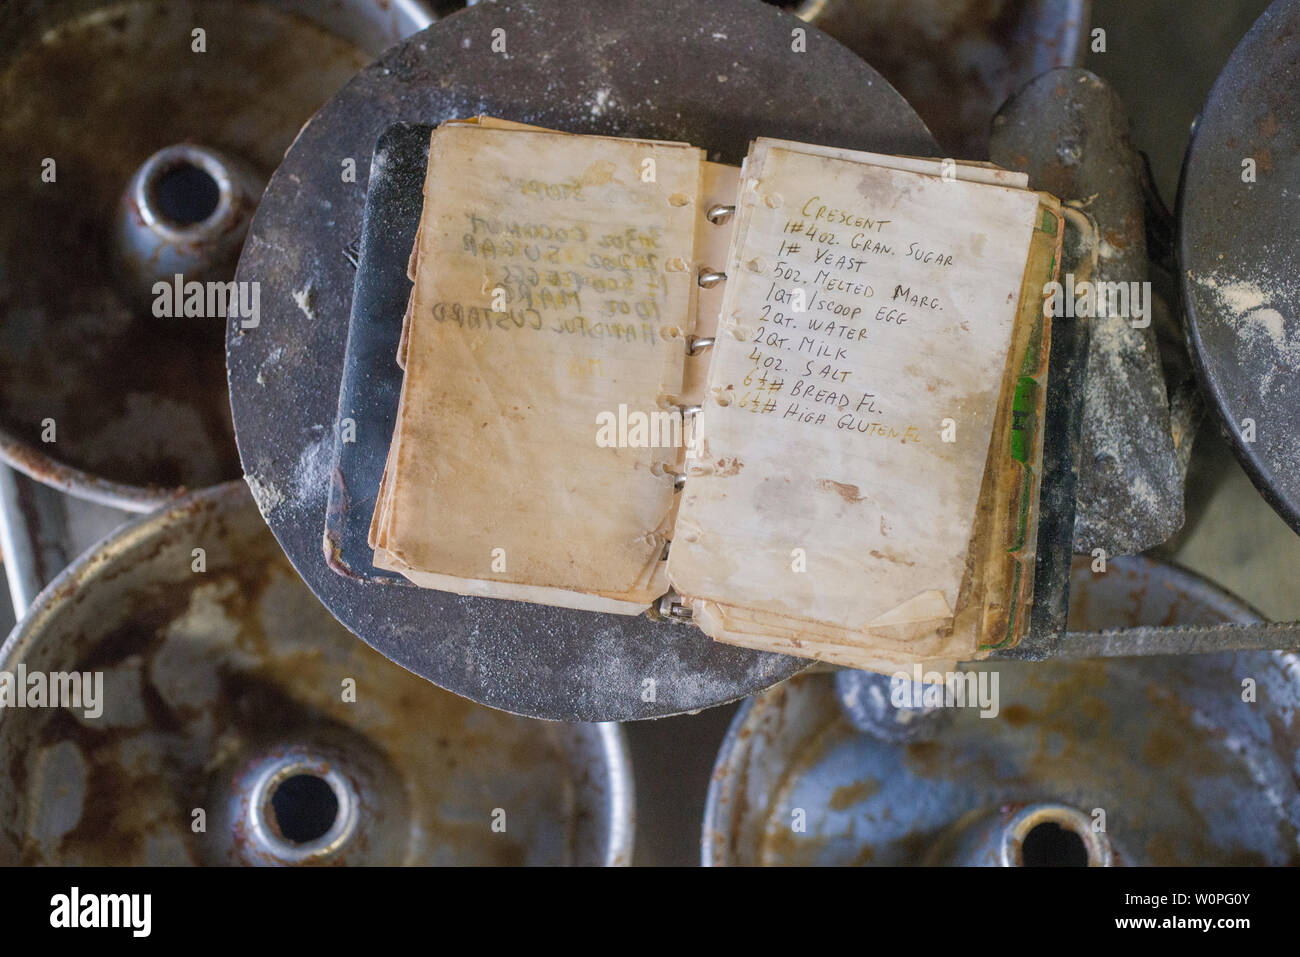 old recipe book open on a scale in a kitchen Stock Photo